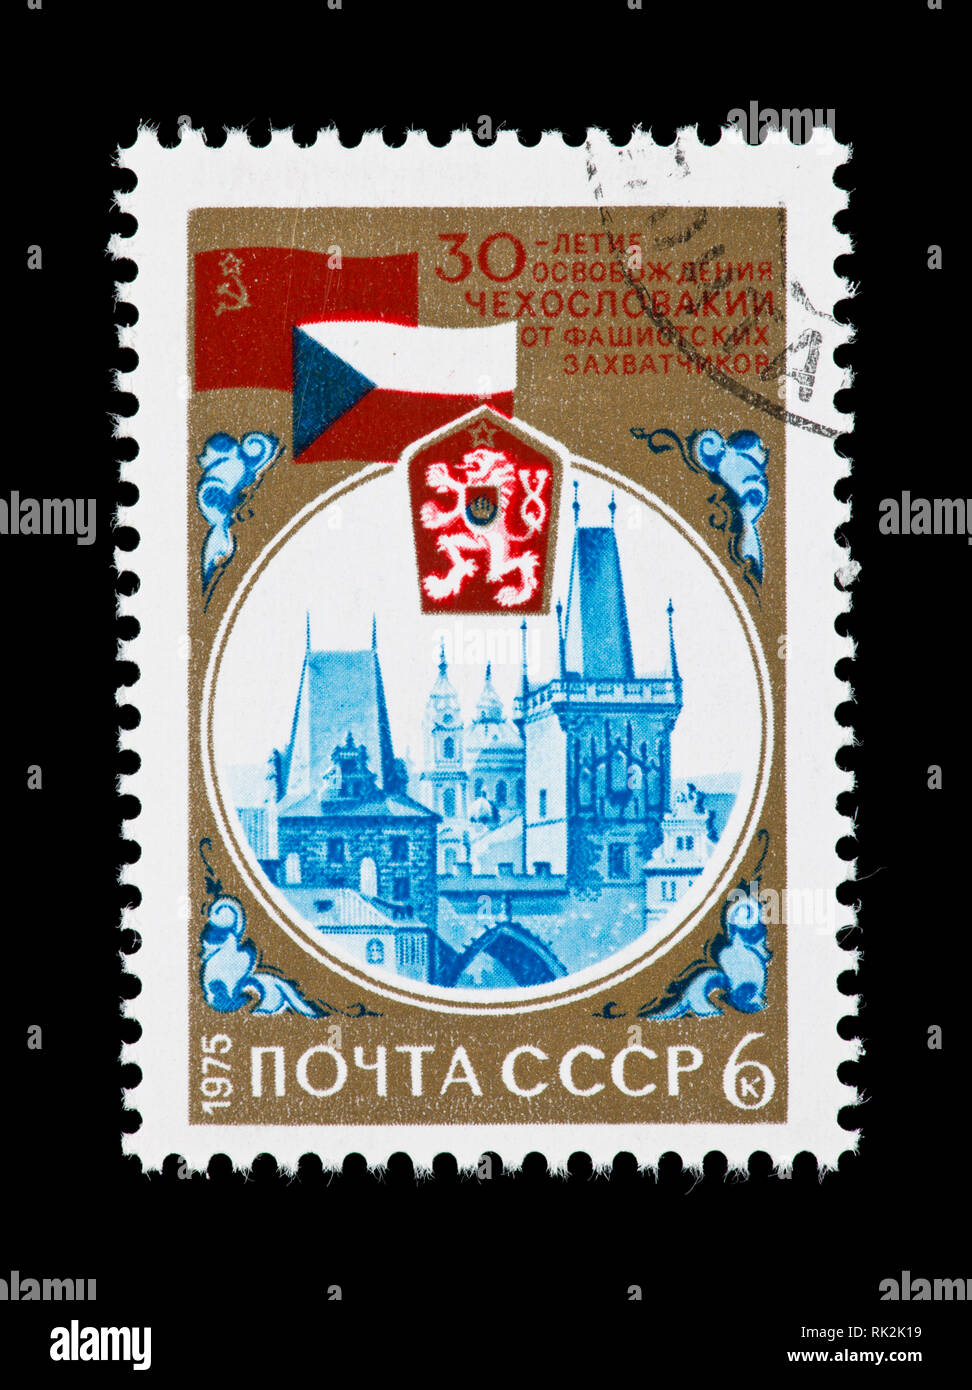 Postage stamp from the Soviet Union depicting Charles Bridge Towers, and flags, 30th anniversary of the liberation of Czechoslovakia from fascism. Stock Photo